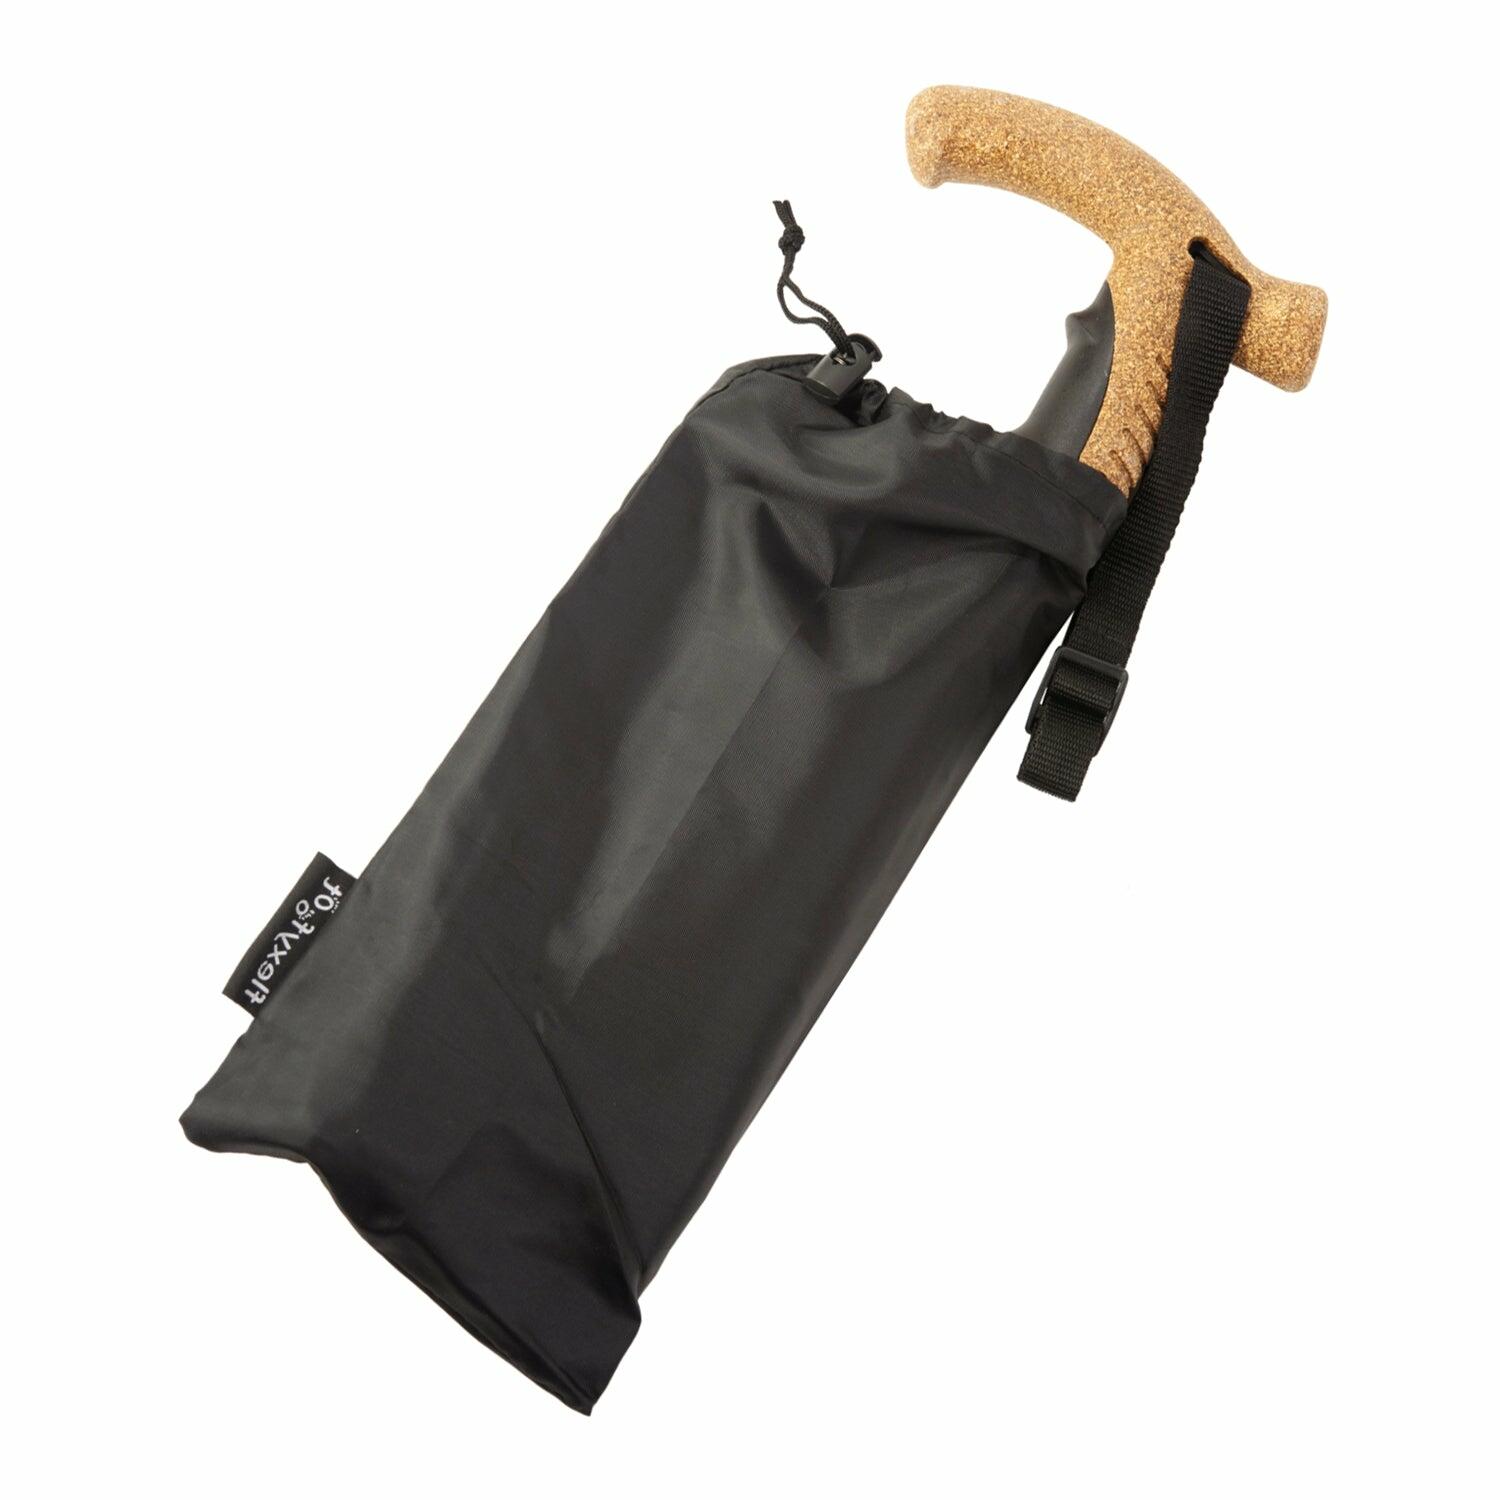 A single black Flexyfoot Premium Cork Handle Folding Walking Stick in the supplied carry bag